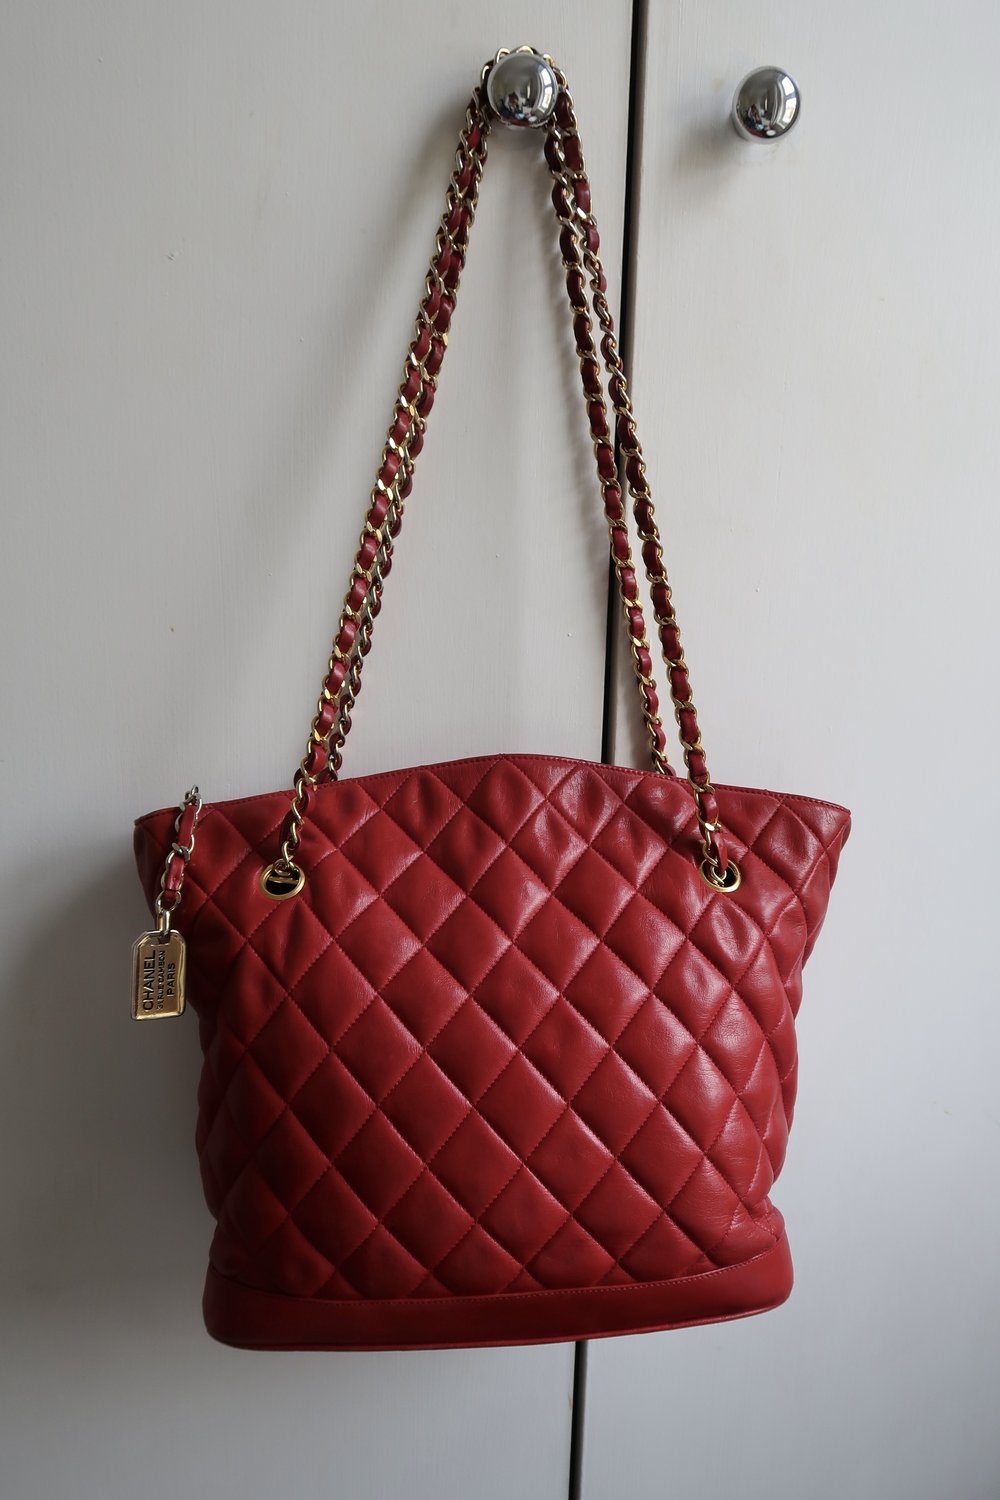 Vintage Chanel Red Quilted Tote Bag (1989-1991 series) — Blaise